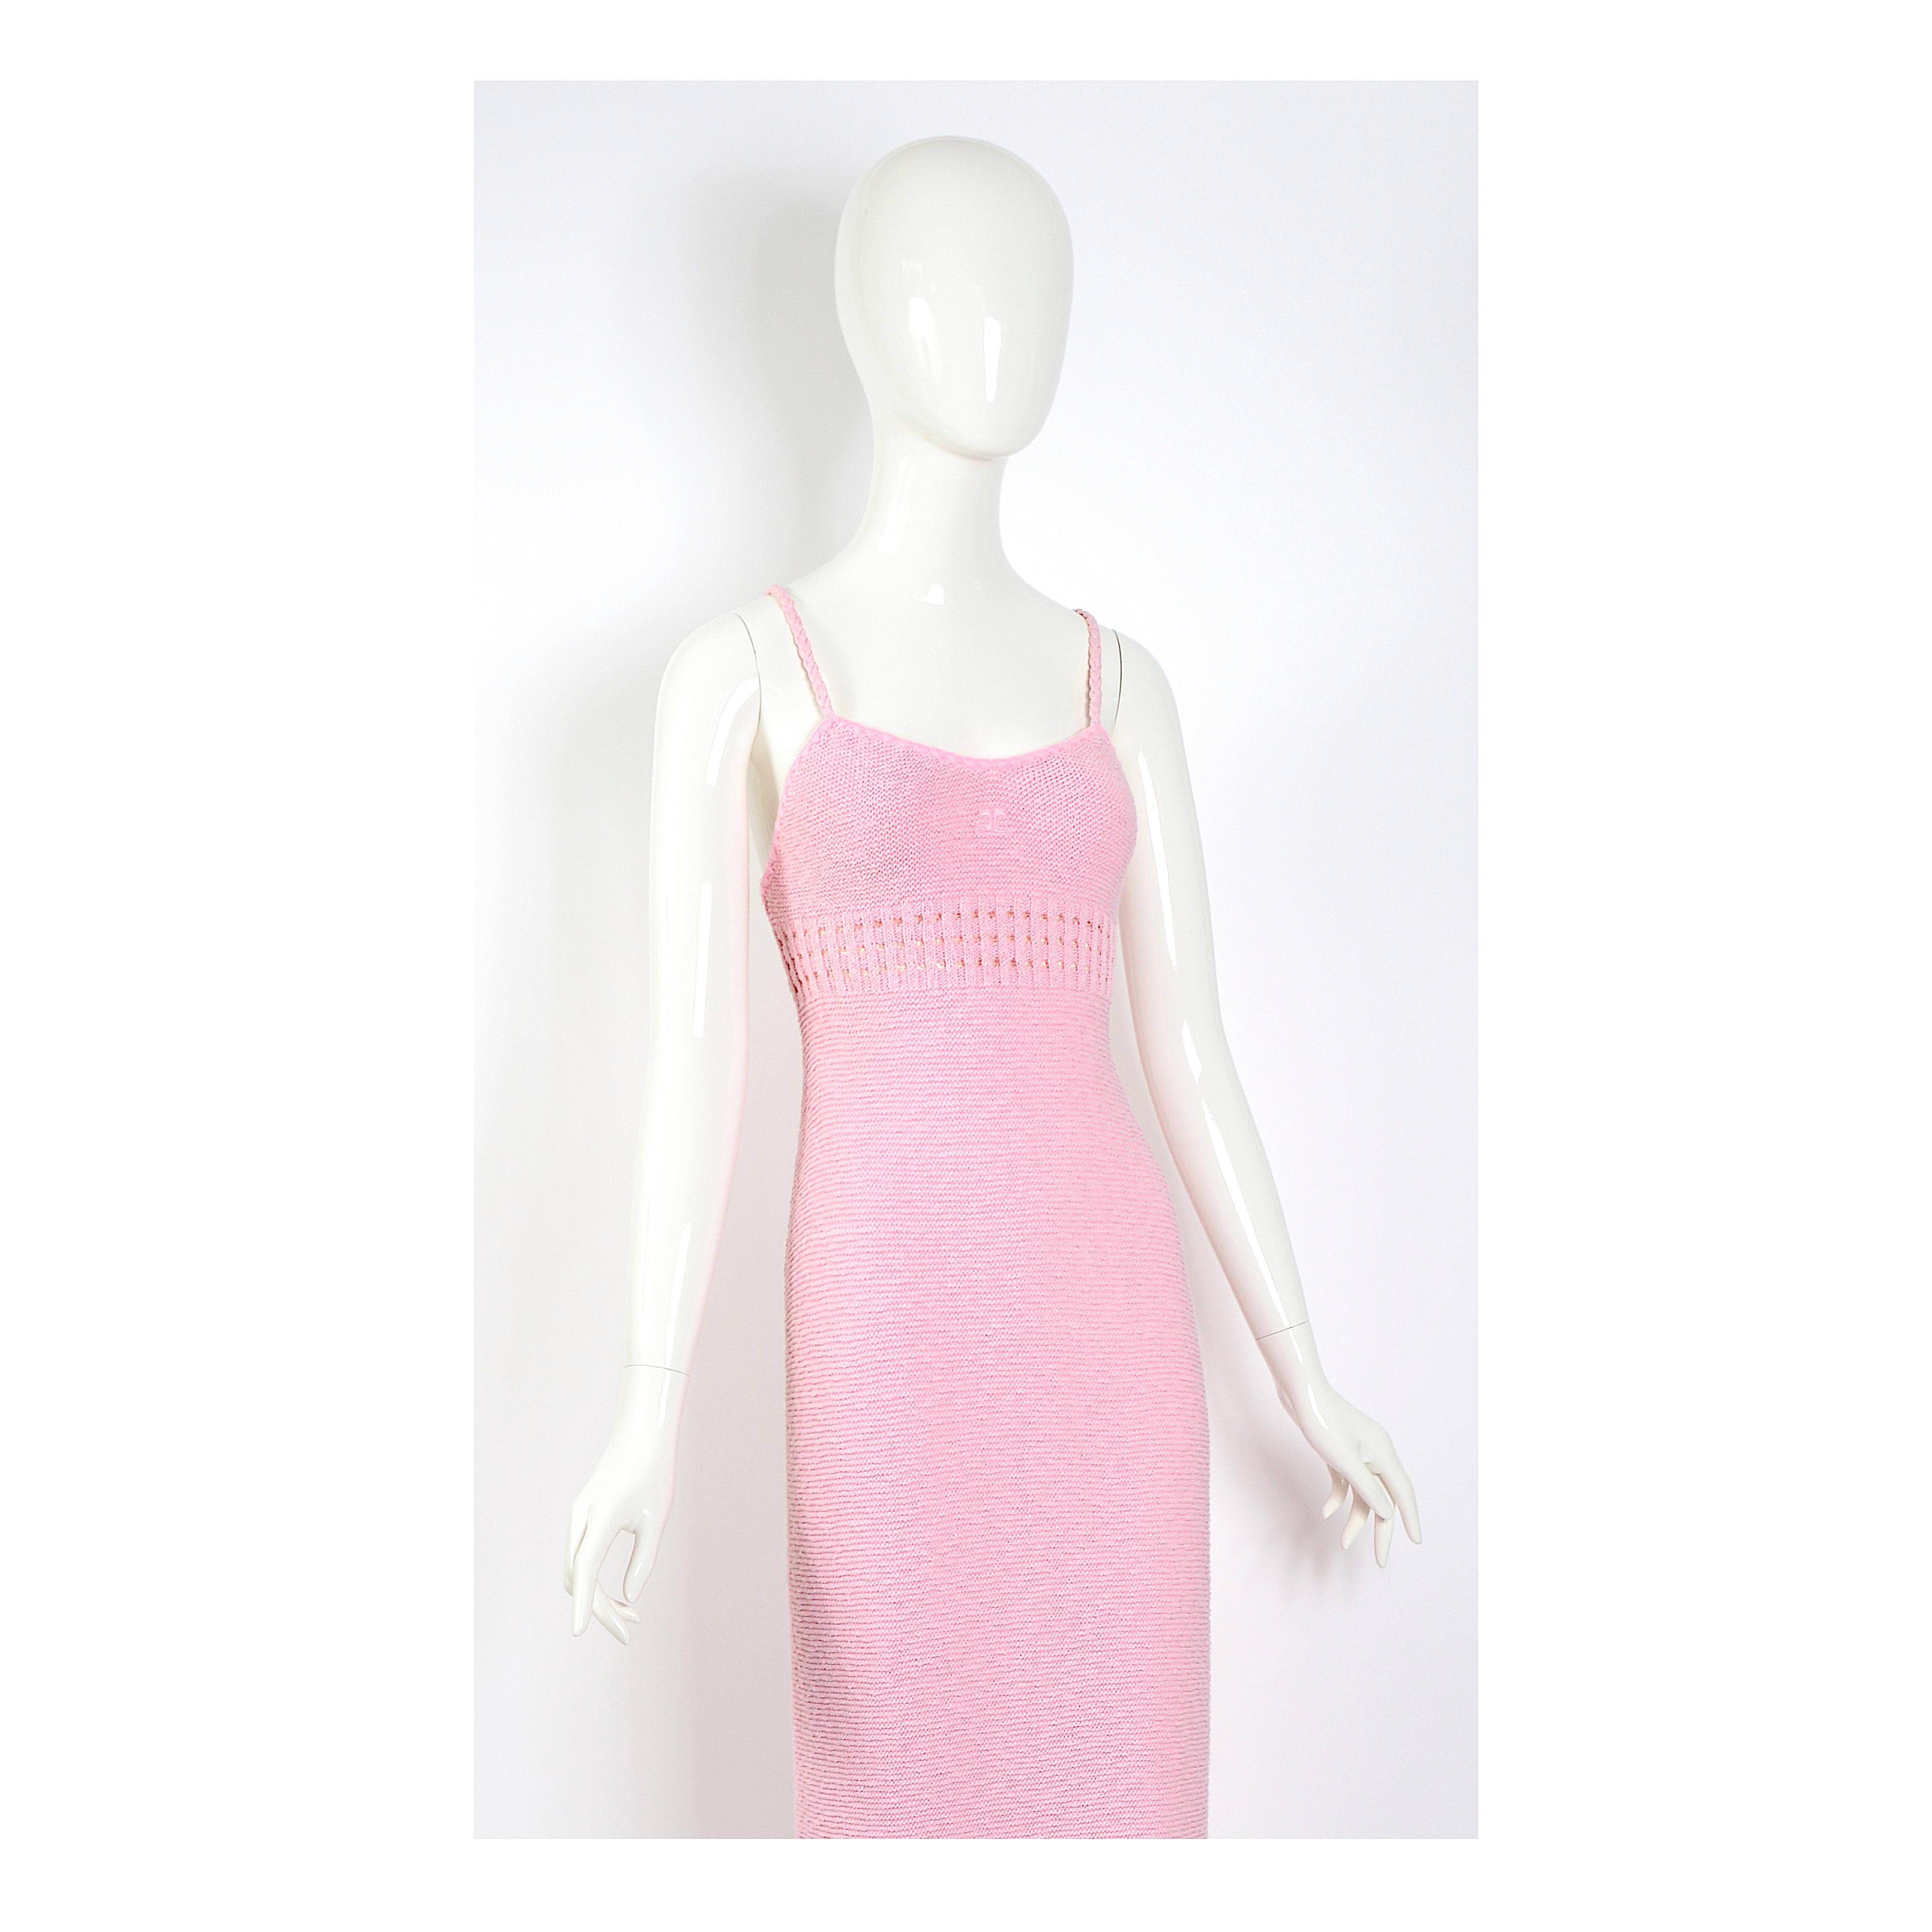 This dress is everything you would expect from a 1960s Courrèges.
Adorable, pink, cotton knit Courrèges long/maxi dress.
Courrèges size O 
Pictured on a doll with perfect size 36.
The dress would work for various sizes, please use the